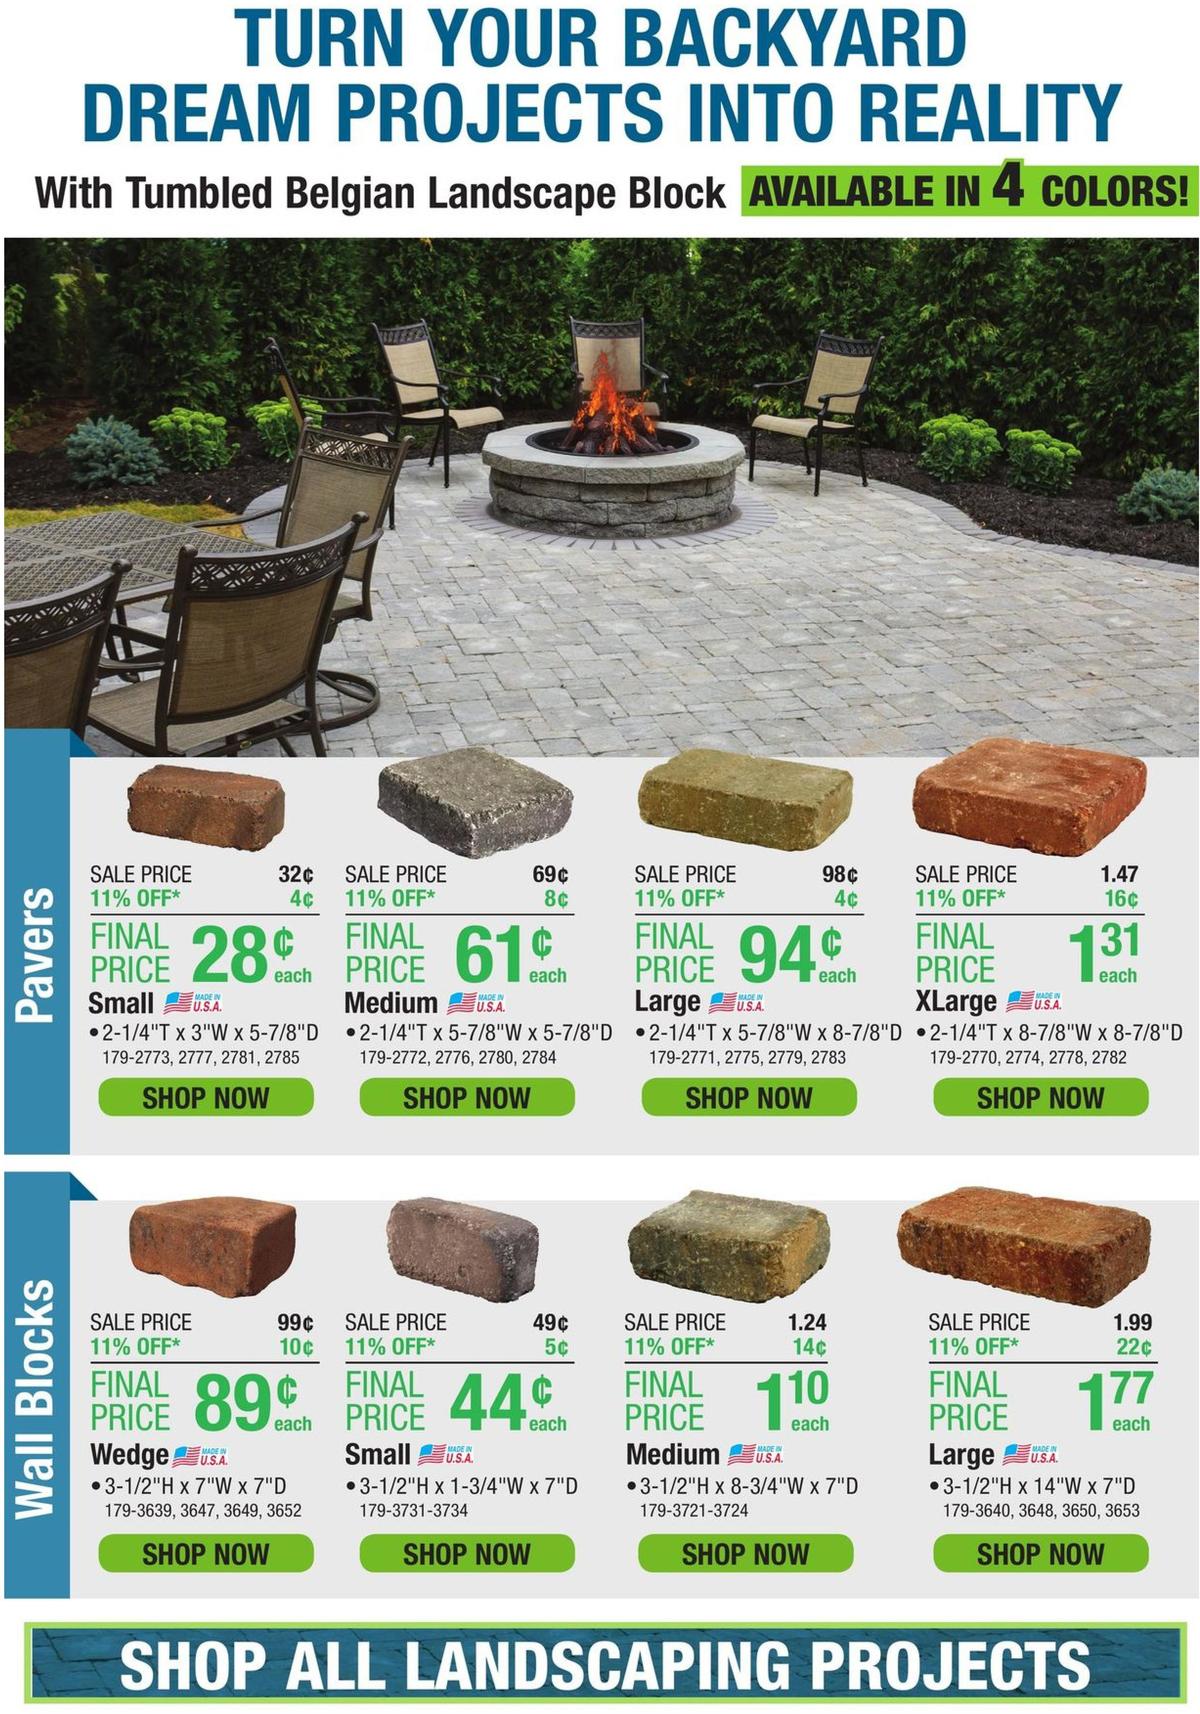 Menards Weekly Ad from June 16